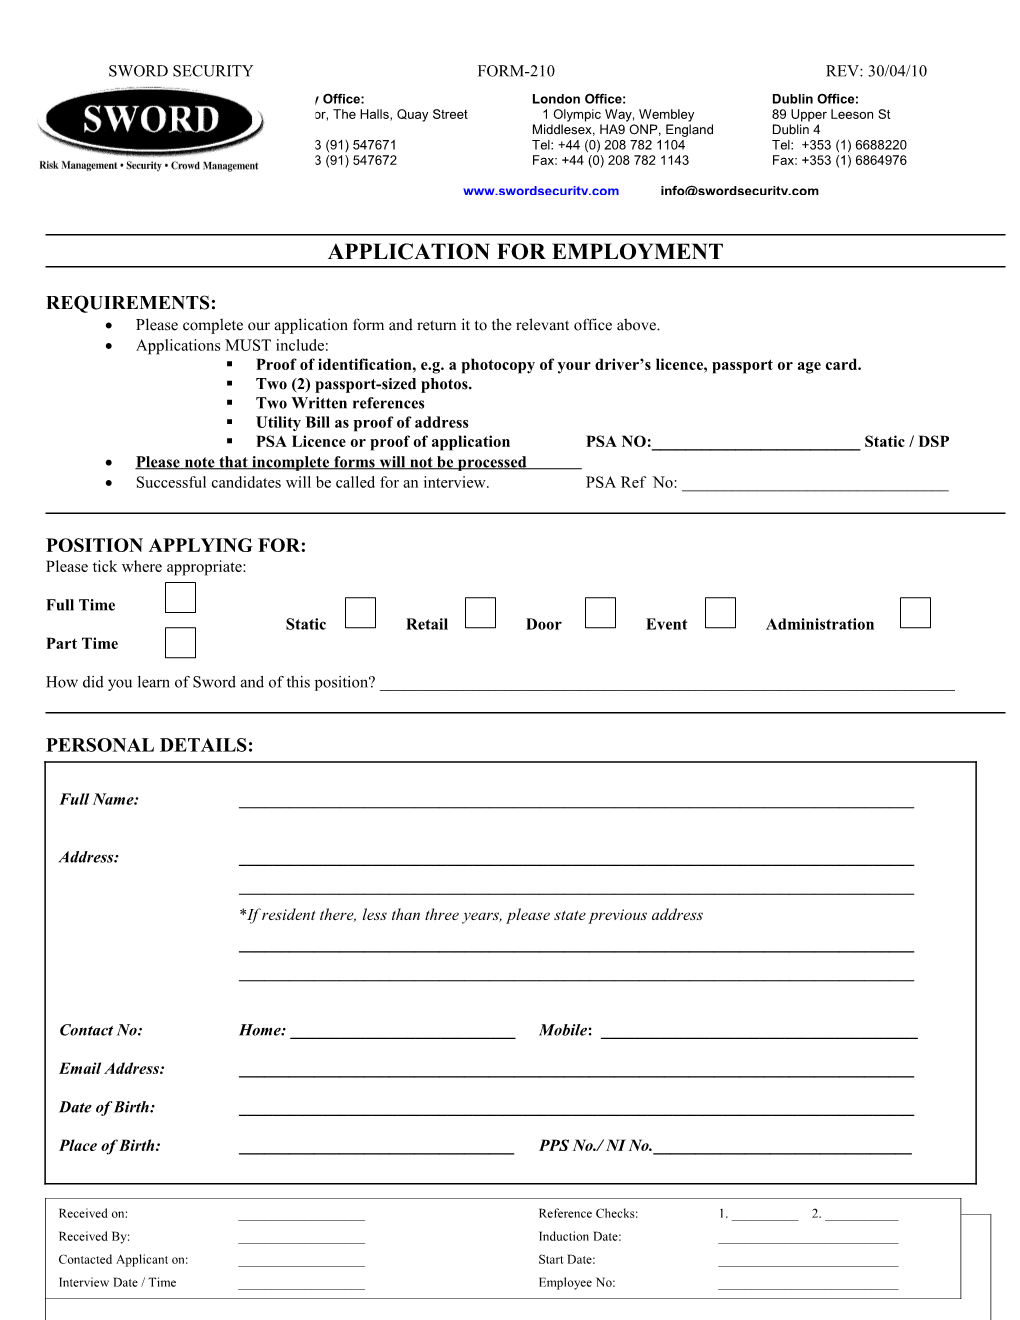 Application for Employment s17